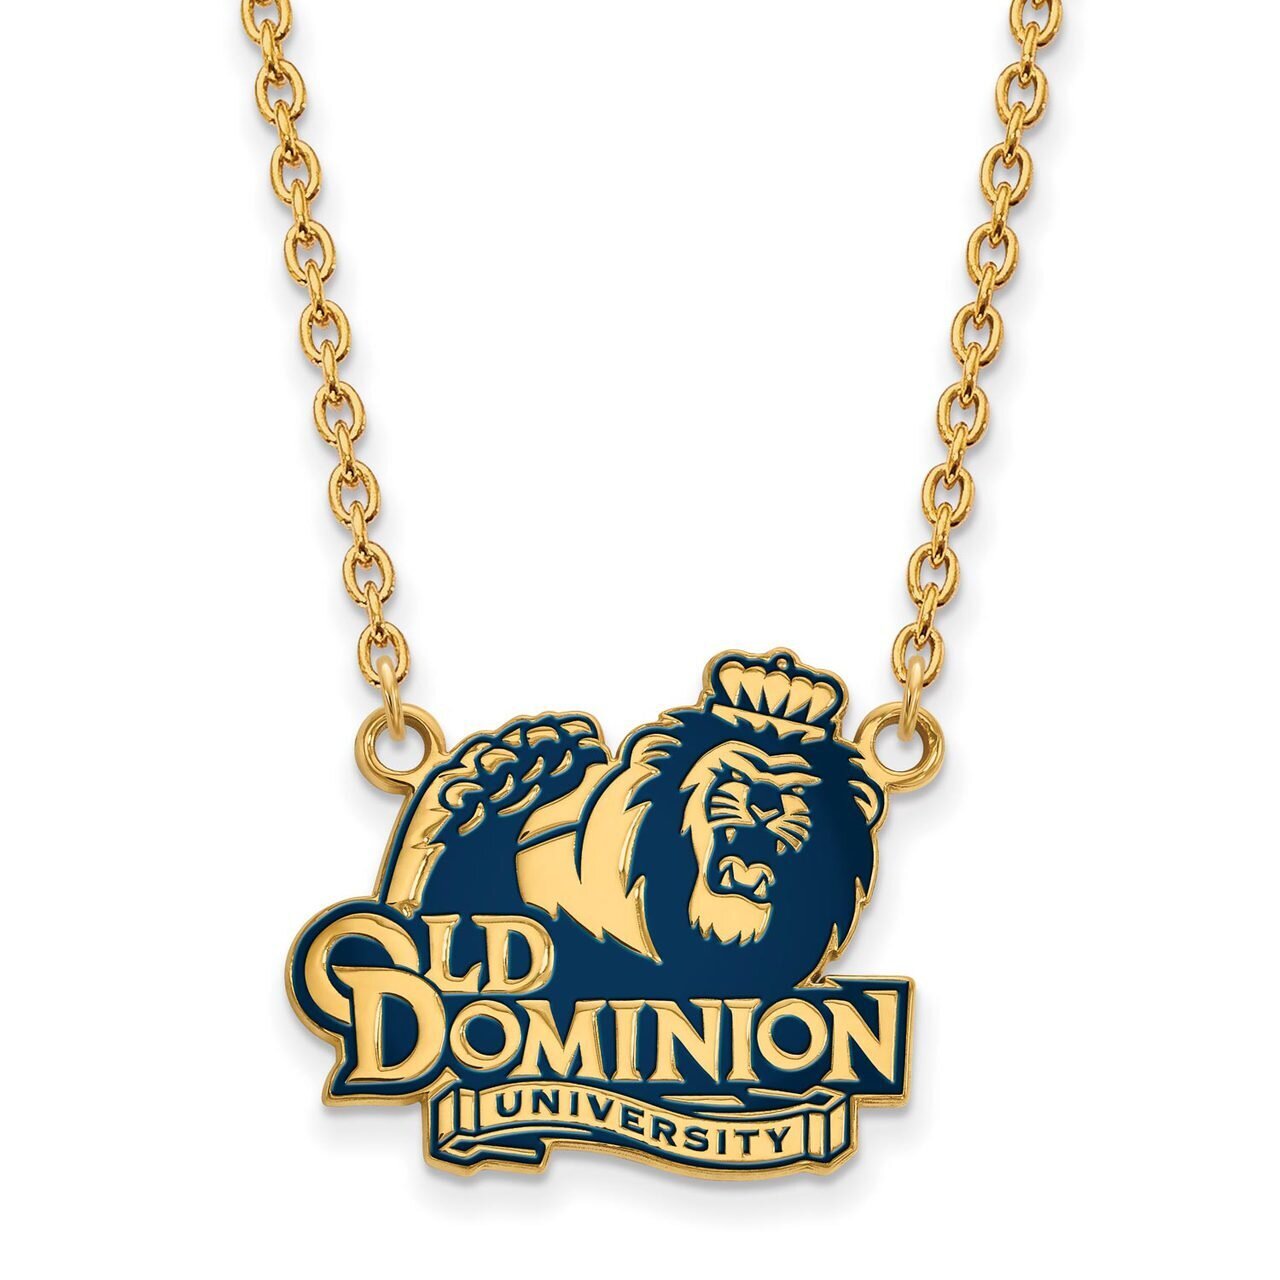 Old Dominion University Large Enamel Pendant with Chain Necklace Gold-plated Silver GP027ODU-18